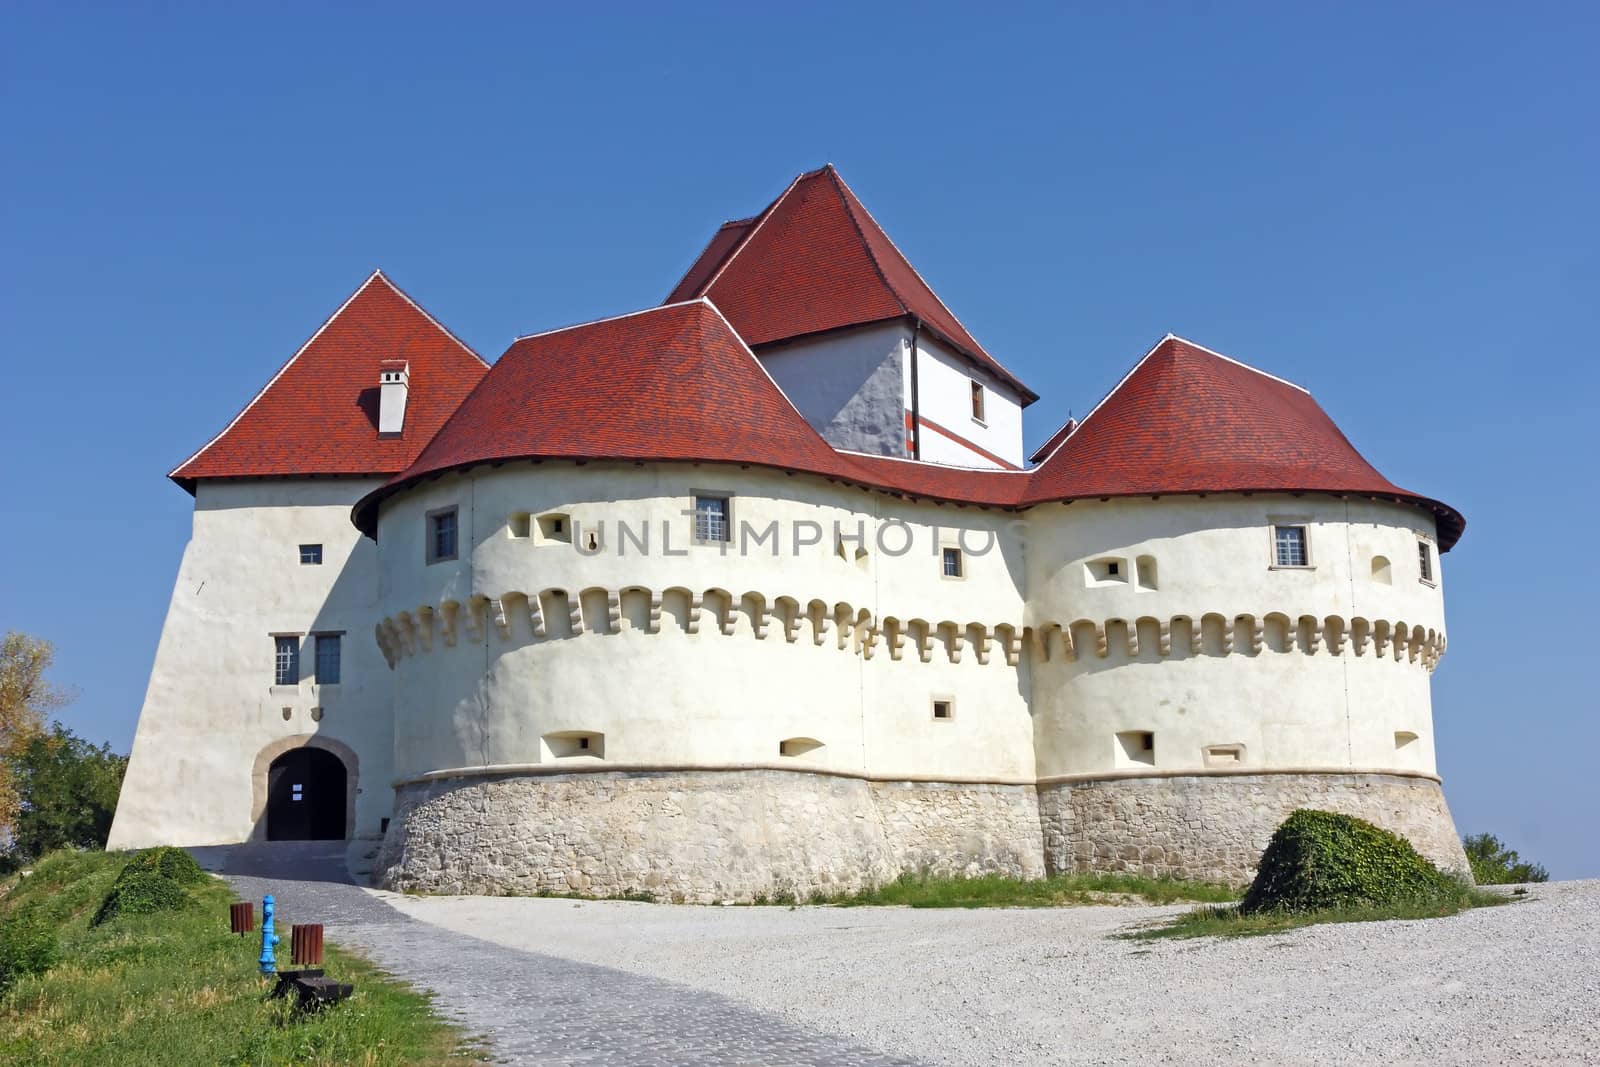 Veliki Tabor, castle and museum in northwest Croatia, dating from the 12th century